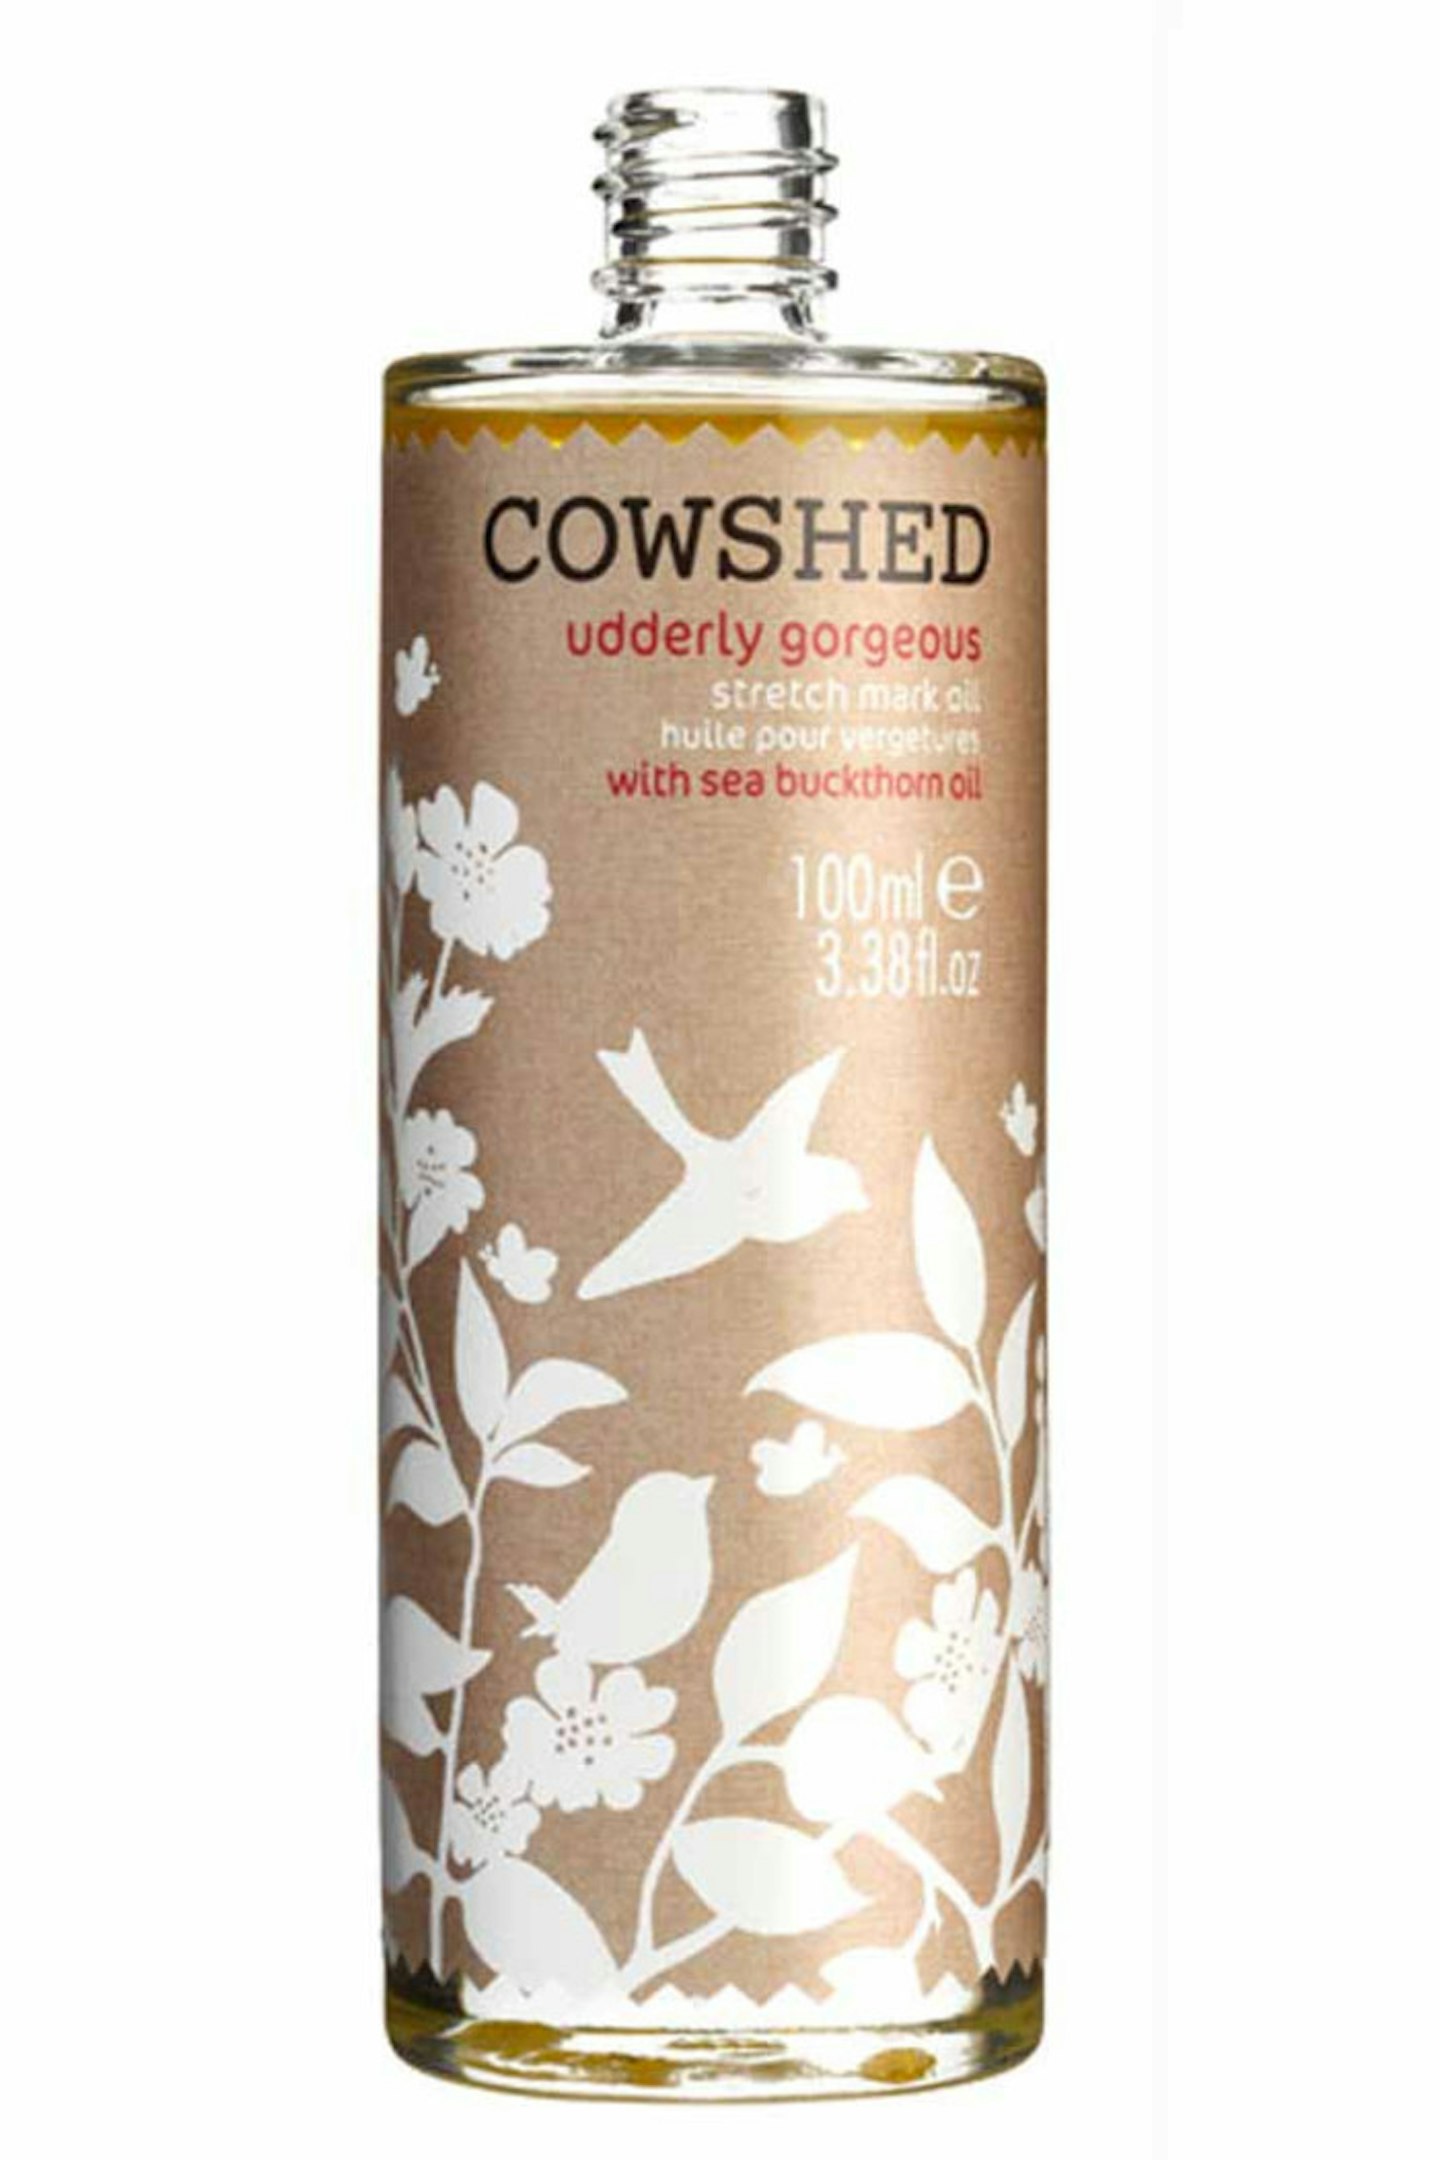 2. Cowshed Udderly Gorgeous Stretch Mark Oil